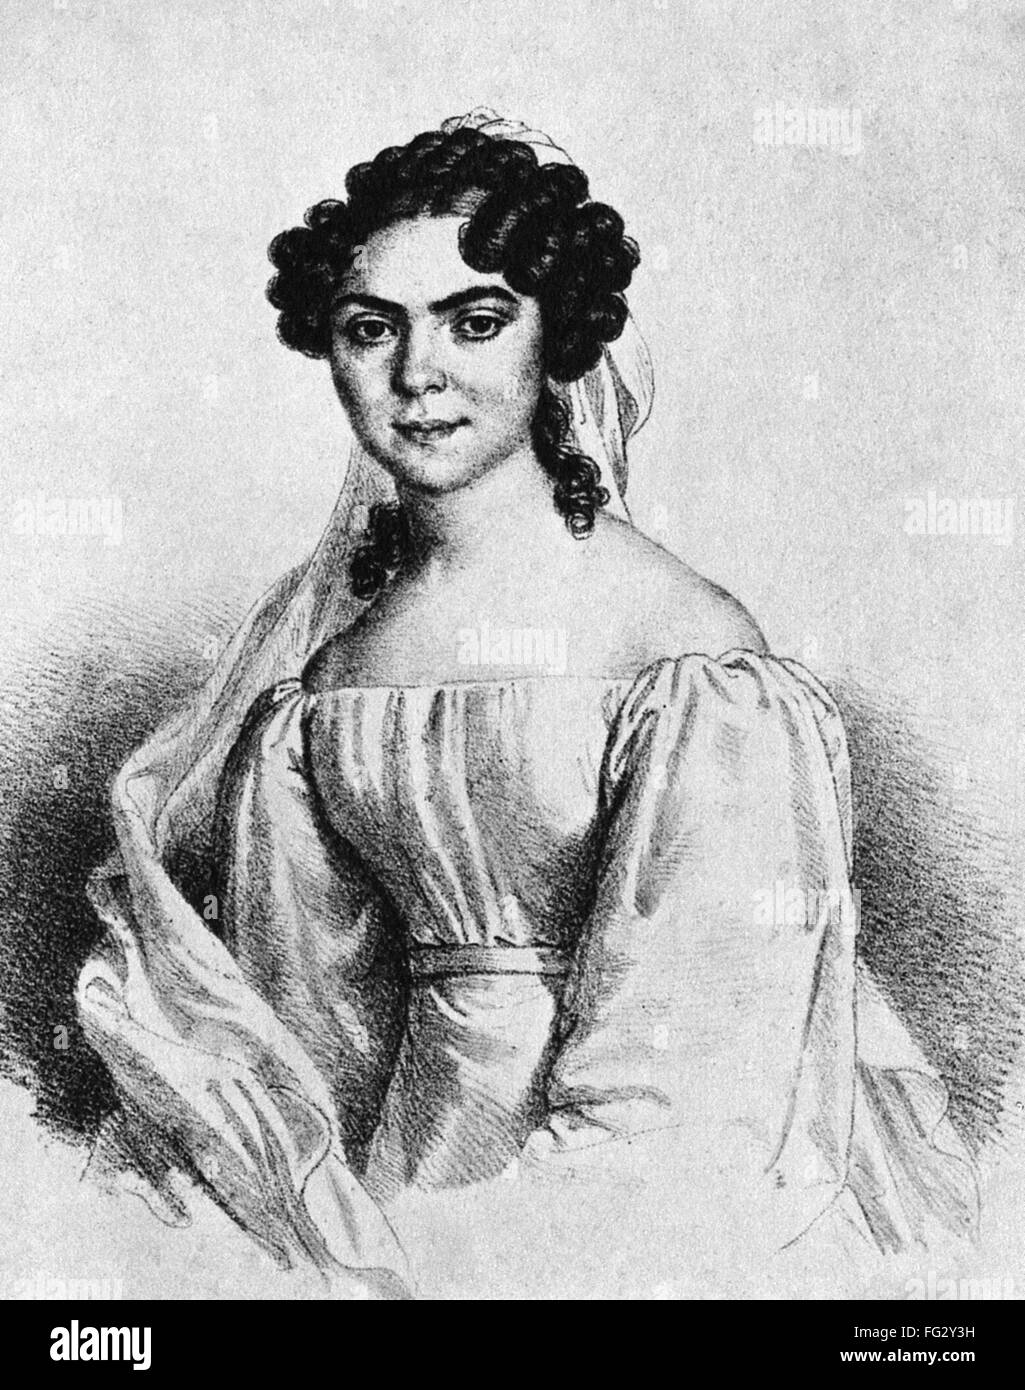 NANETTE SCHECHNER-WAAGEN /n(1806-1860). German opera singer. Lithograph by Joseph Lanzedelly, mid 19th century. Stock Photo